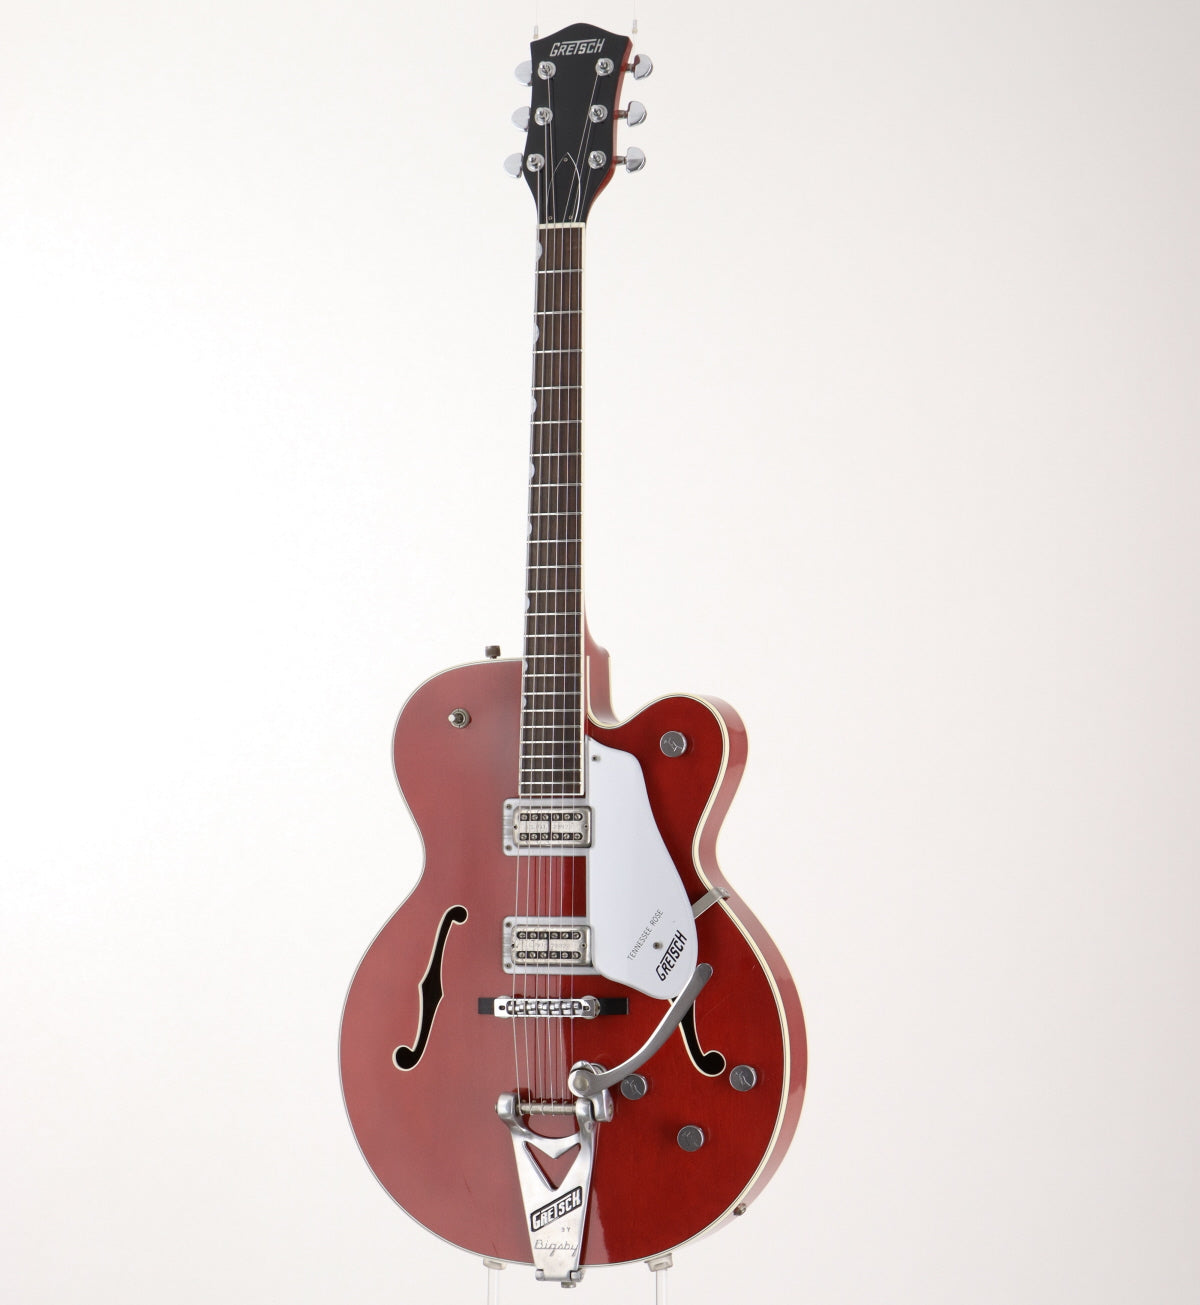 [SN 932119-585] USED Gretsch / 6119 Tennessee Rose [06]